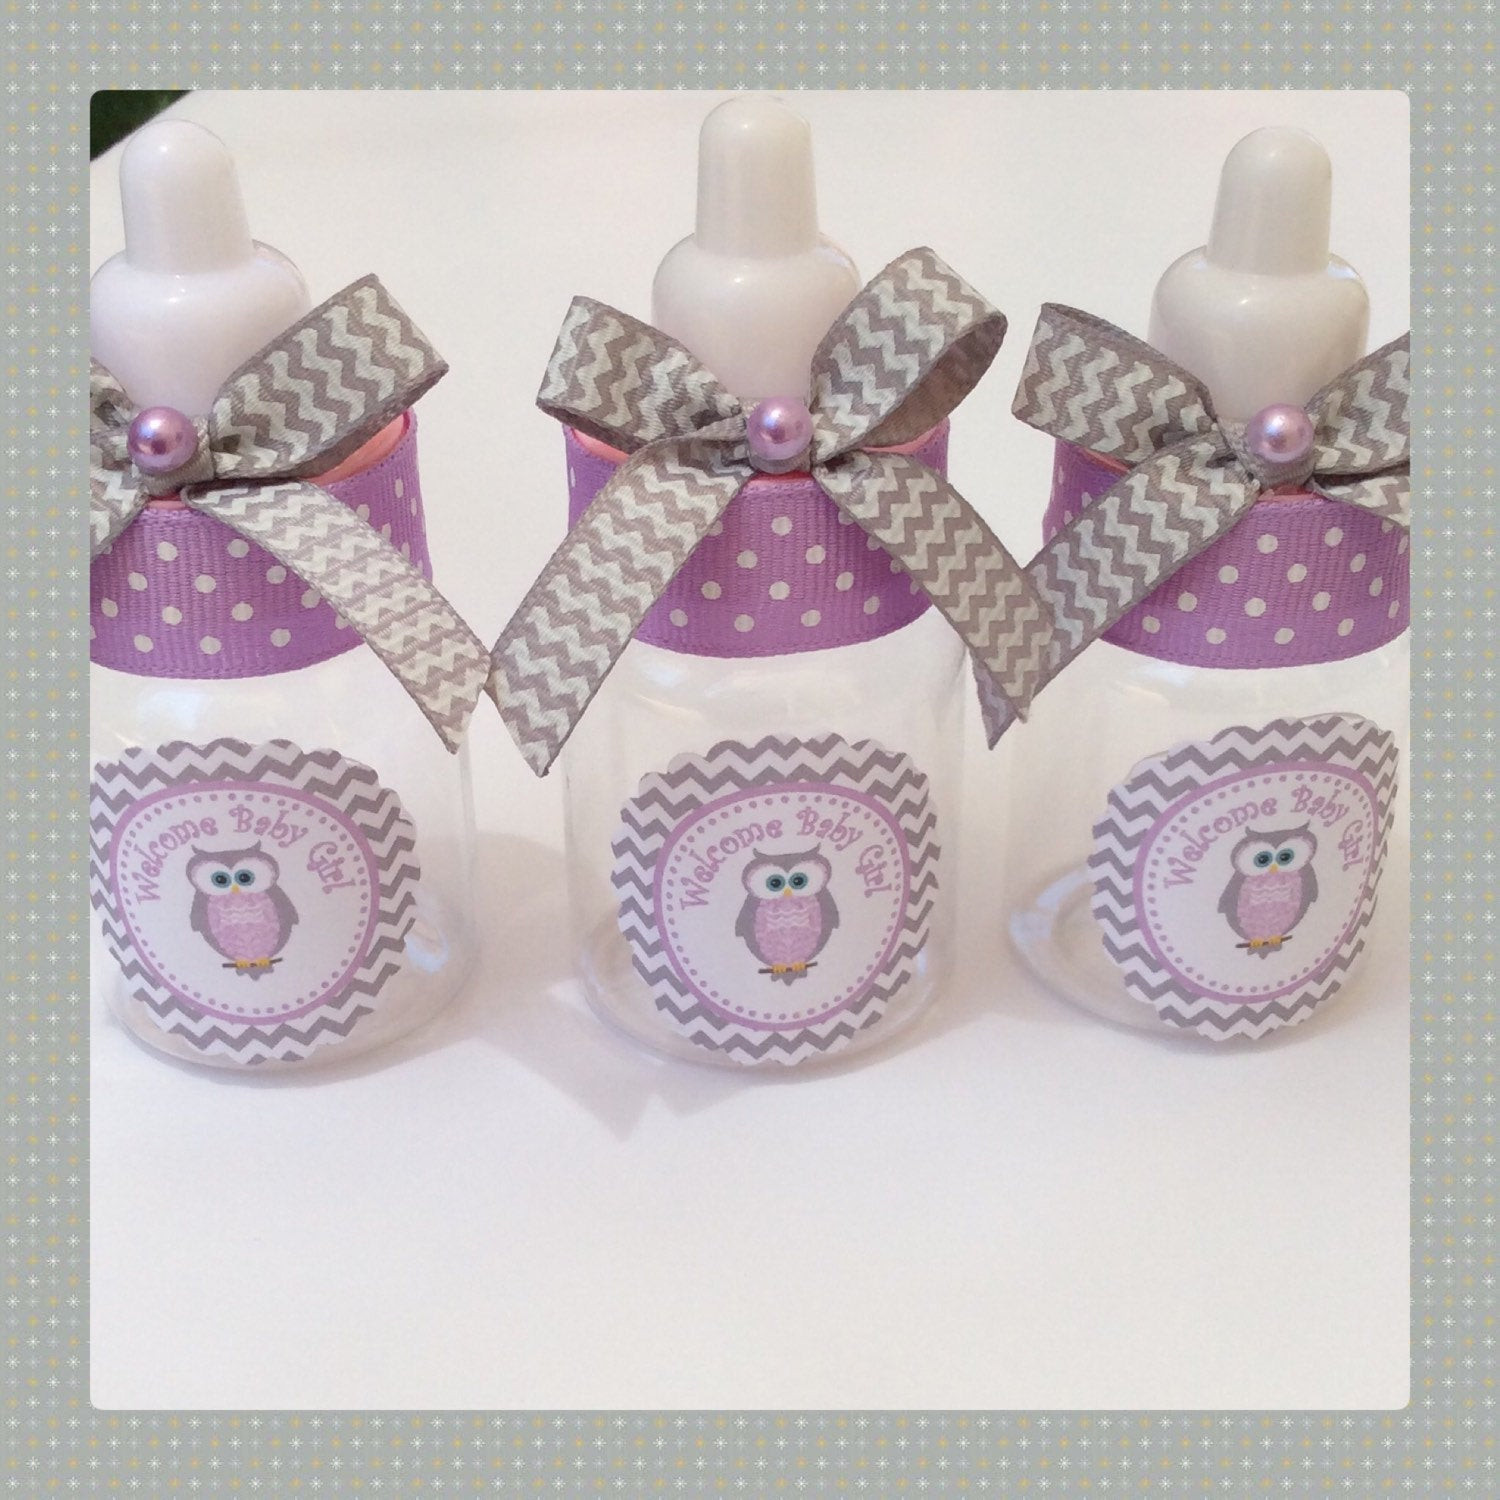 Owl Baby Shower Gifts
 12 small 3 5 Owl baby shower favors chevron owl baby